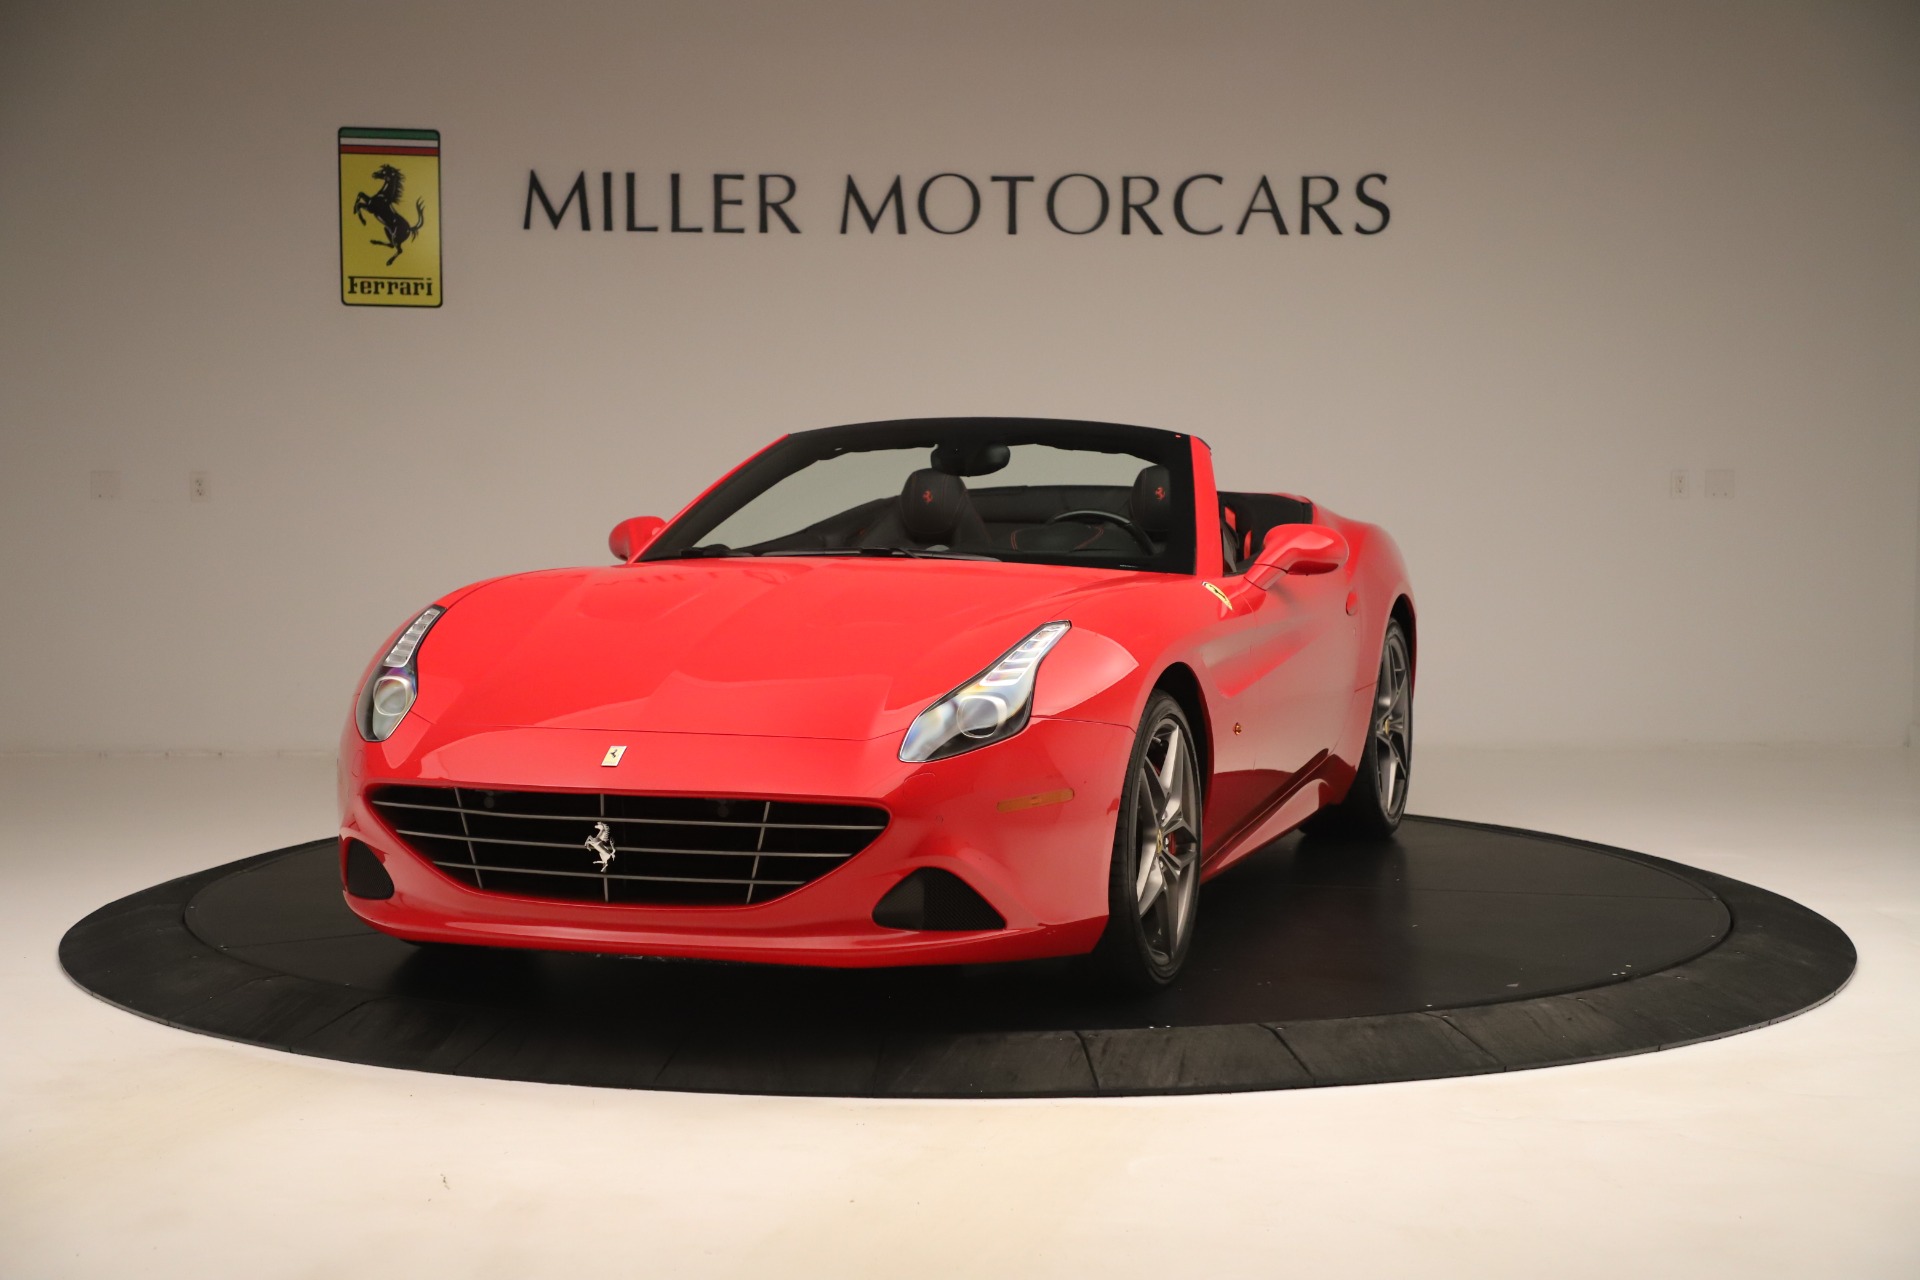 Used 2016 Ferrari California T for sale Sold at Rolls-Royce Motor Cars Greenwich in Greenwich CT 06830 1